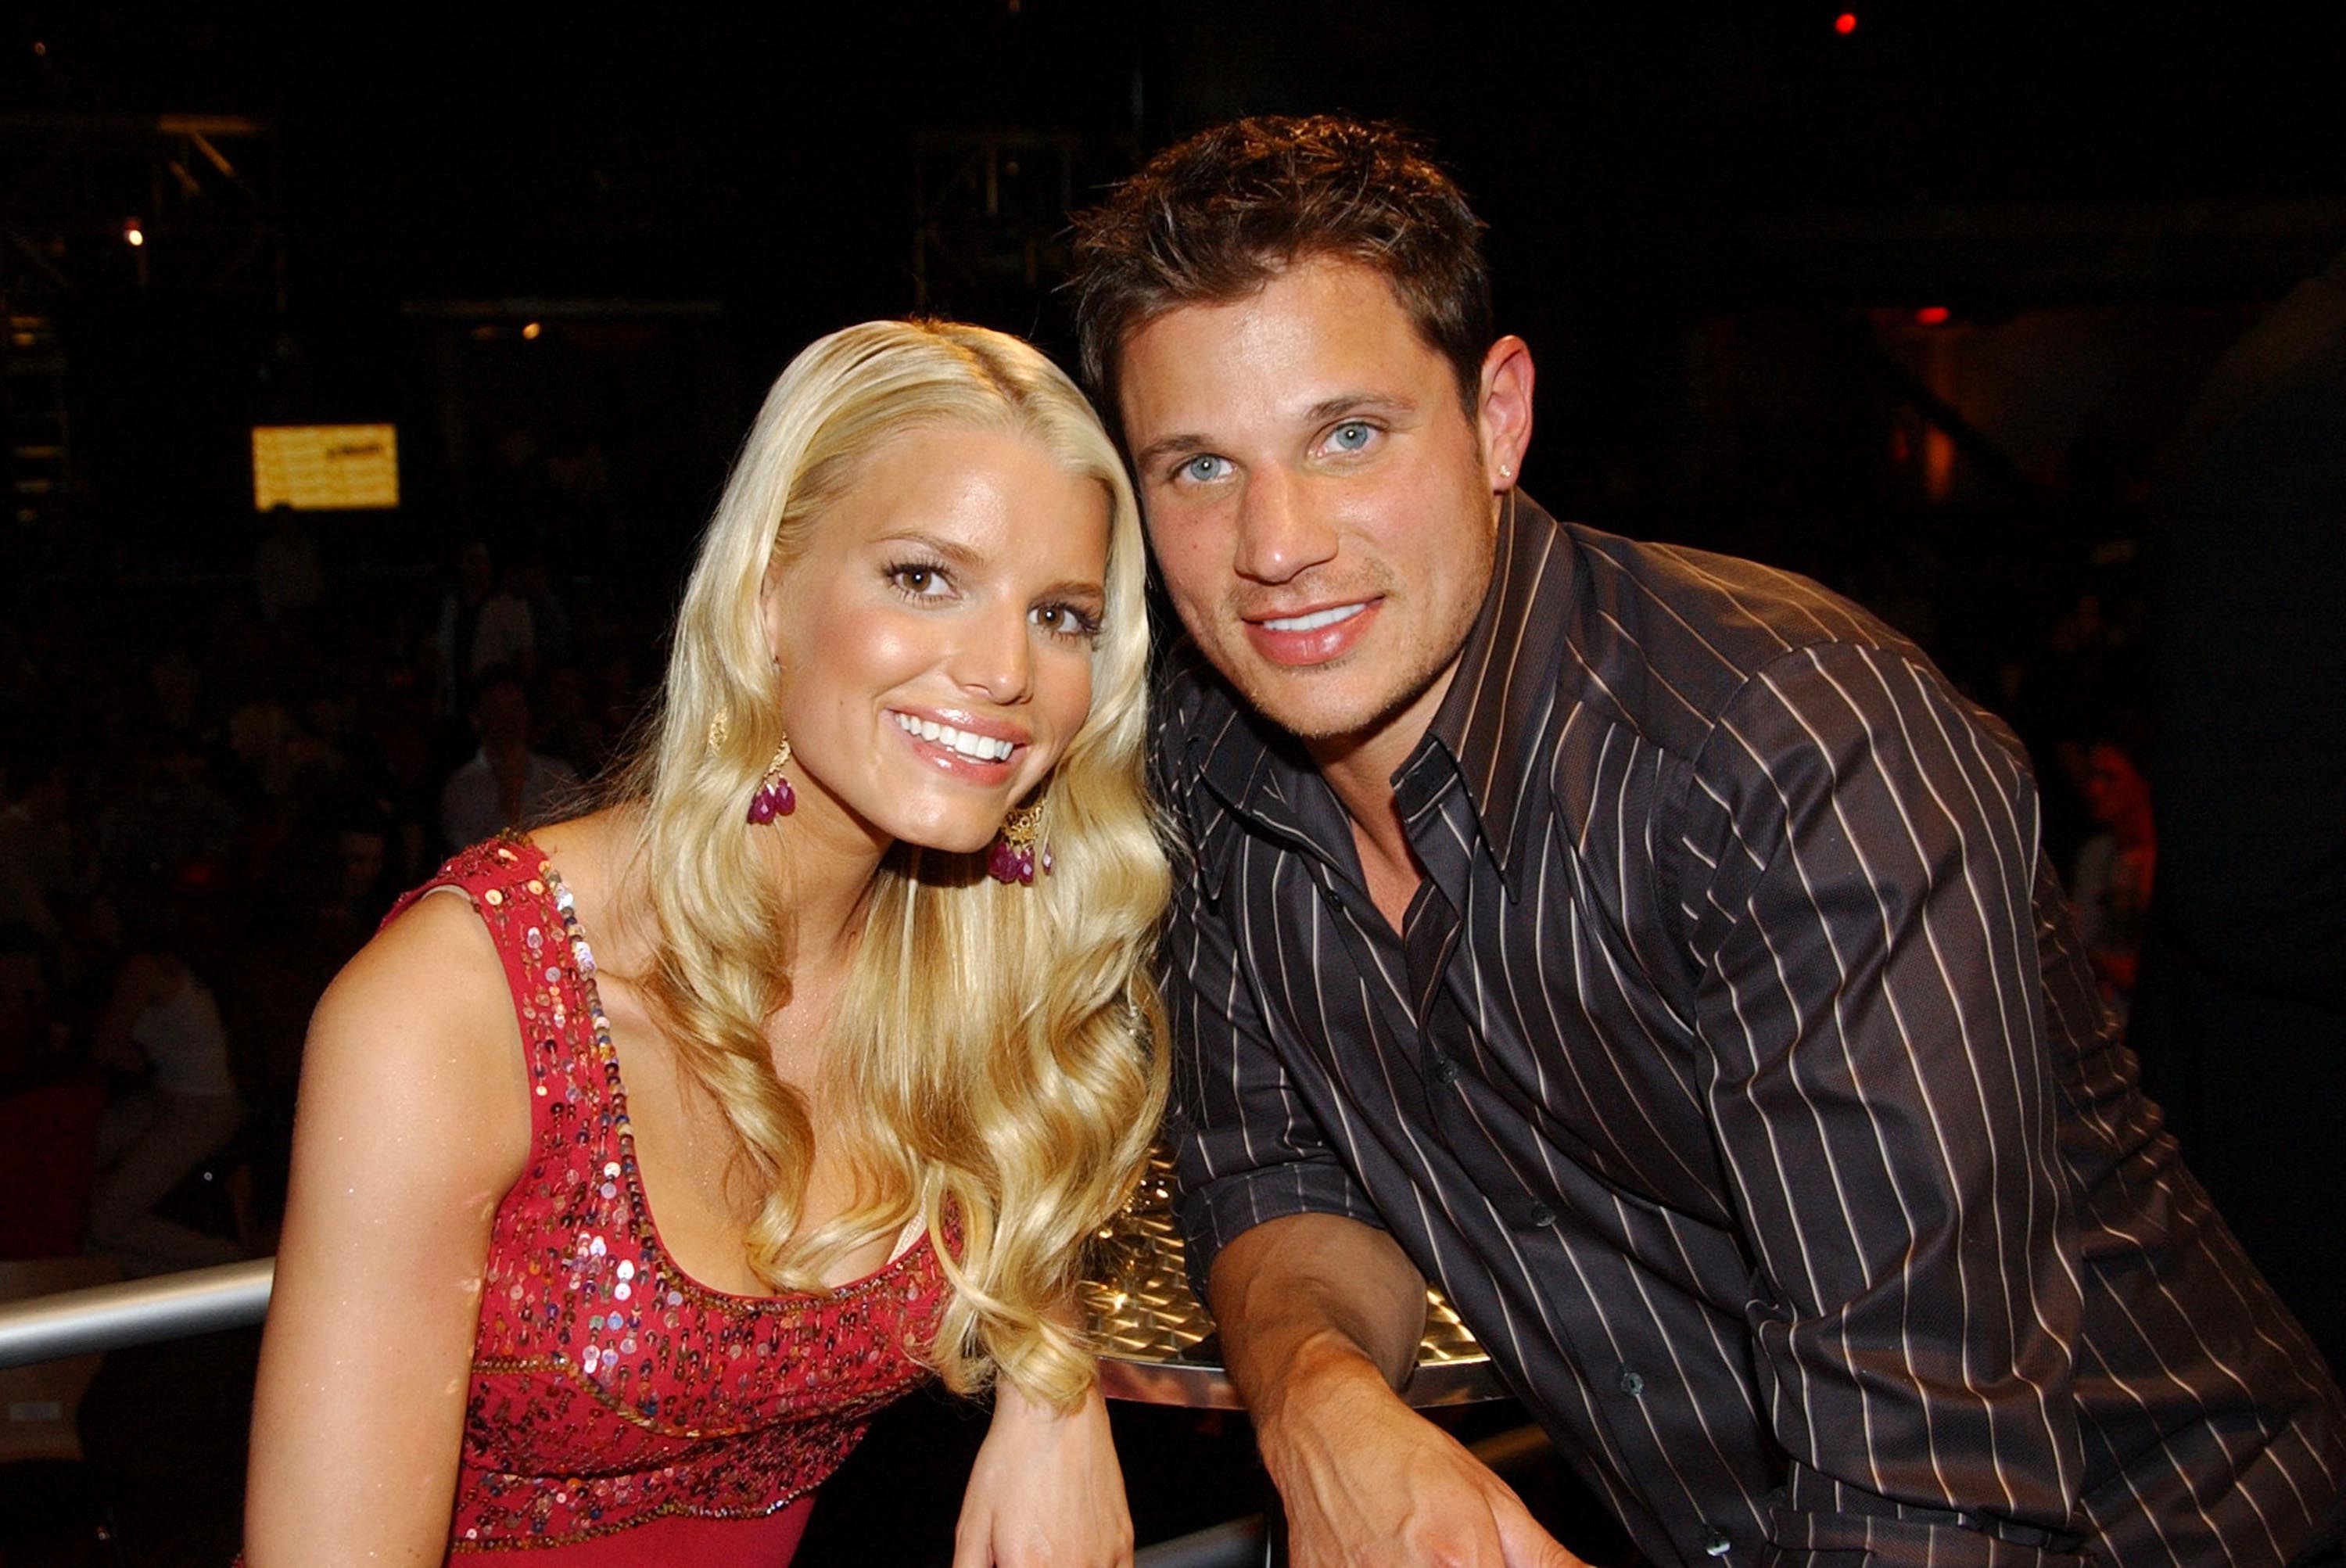 Jessica Simpson or Nick Lachey: Who Had the Higher Net Worth When They Were Married?